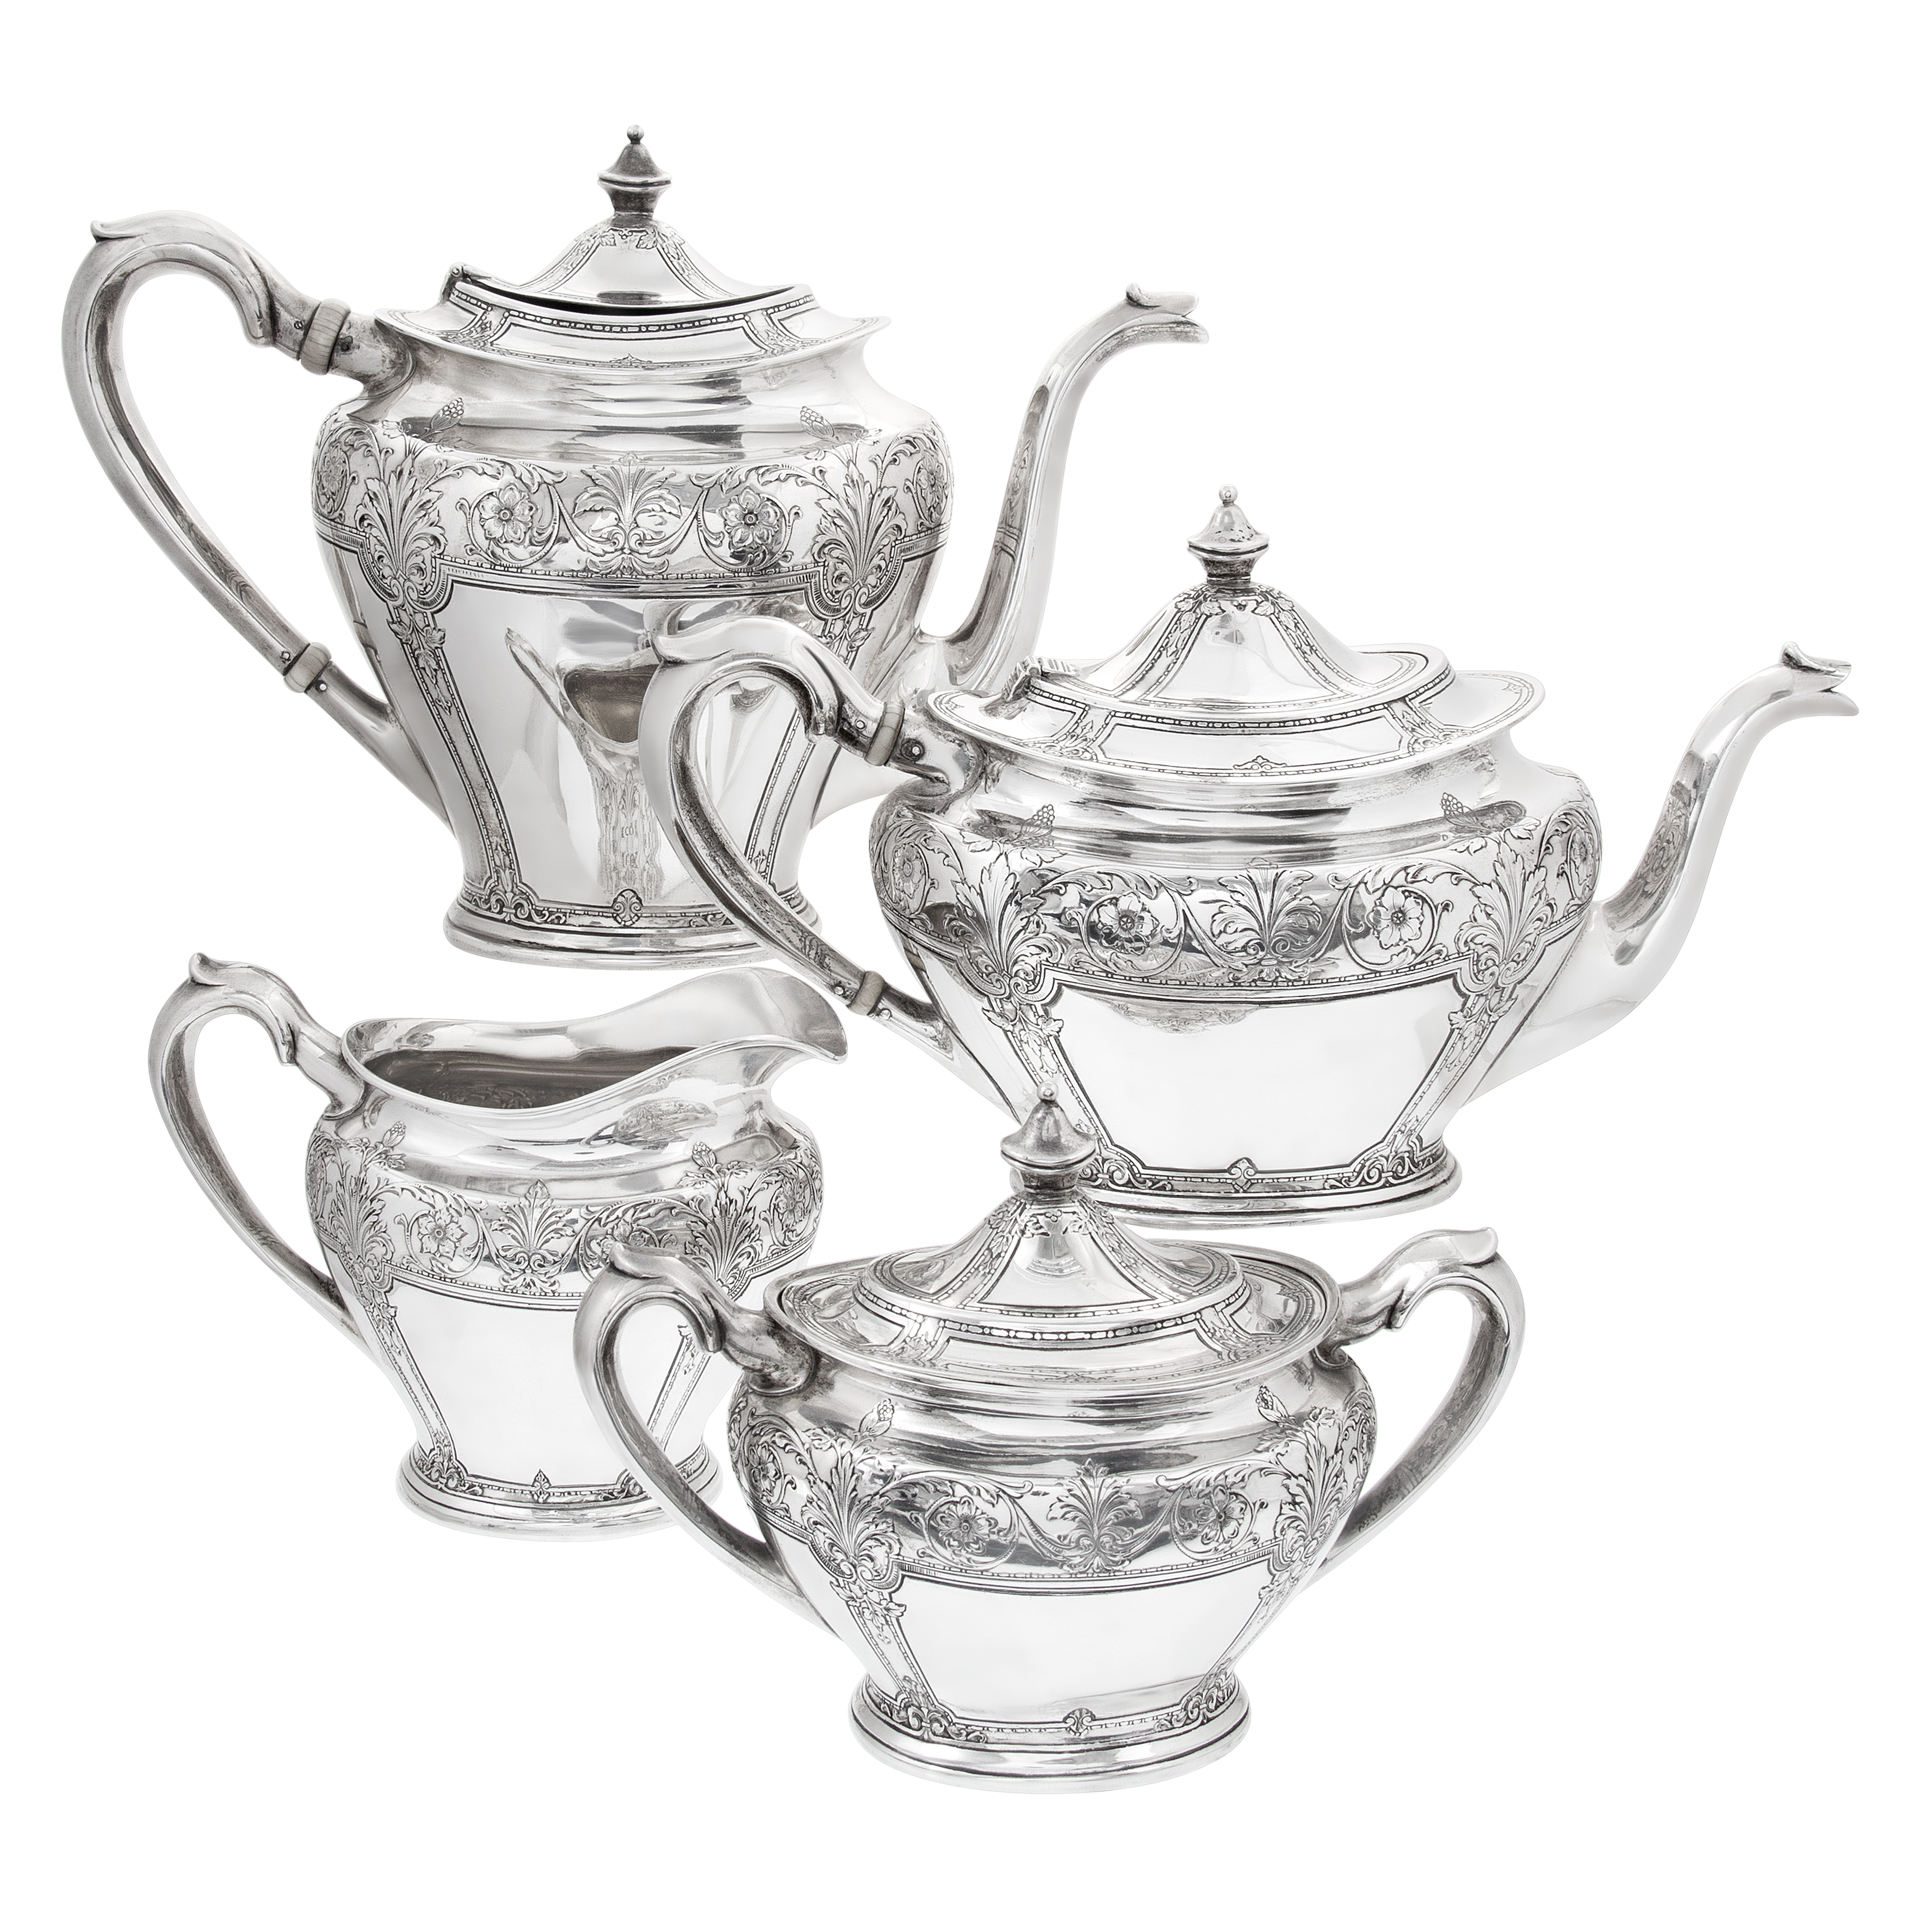 Charming Victorian 4 pieces tea/coffee sterling silver set, by the Lebkuecher & Co Sterling Silver Company from Newark, New Jersey image 1